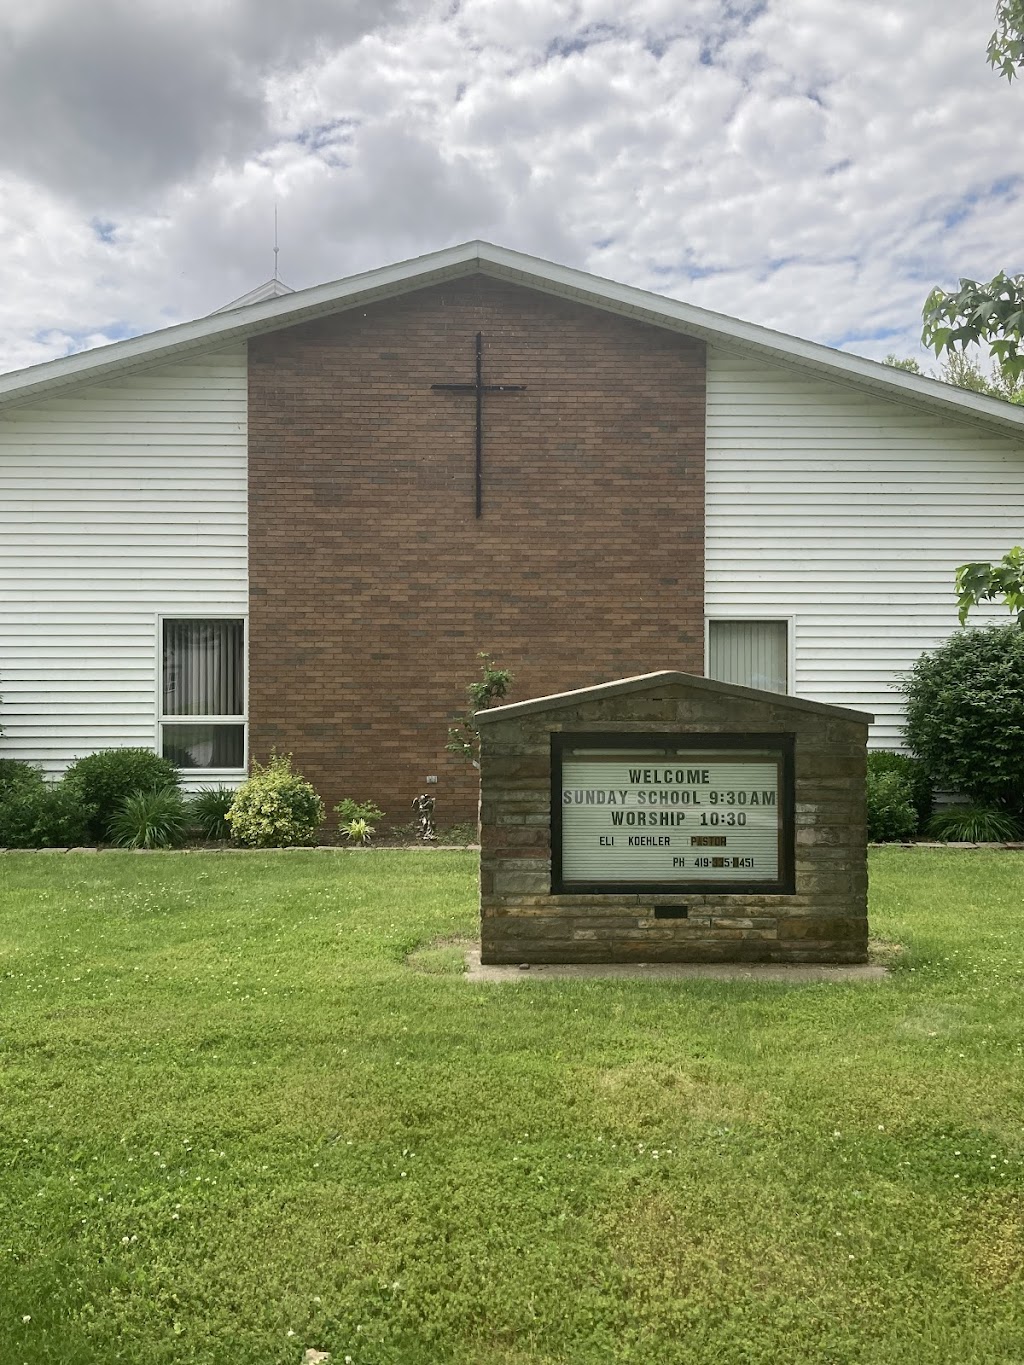 Zion Church of Wauseon | Zion Cemetery, 4533 Co Rd 11, Wauseon, OH 43567, USA | Phone: (419) 335-0451